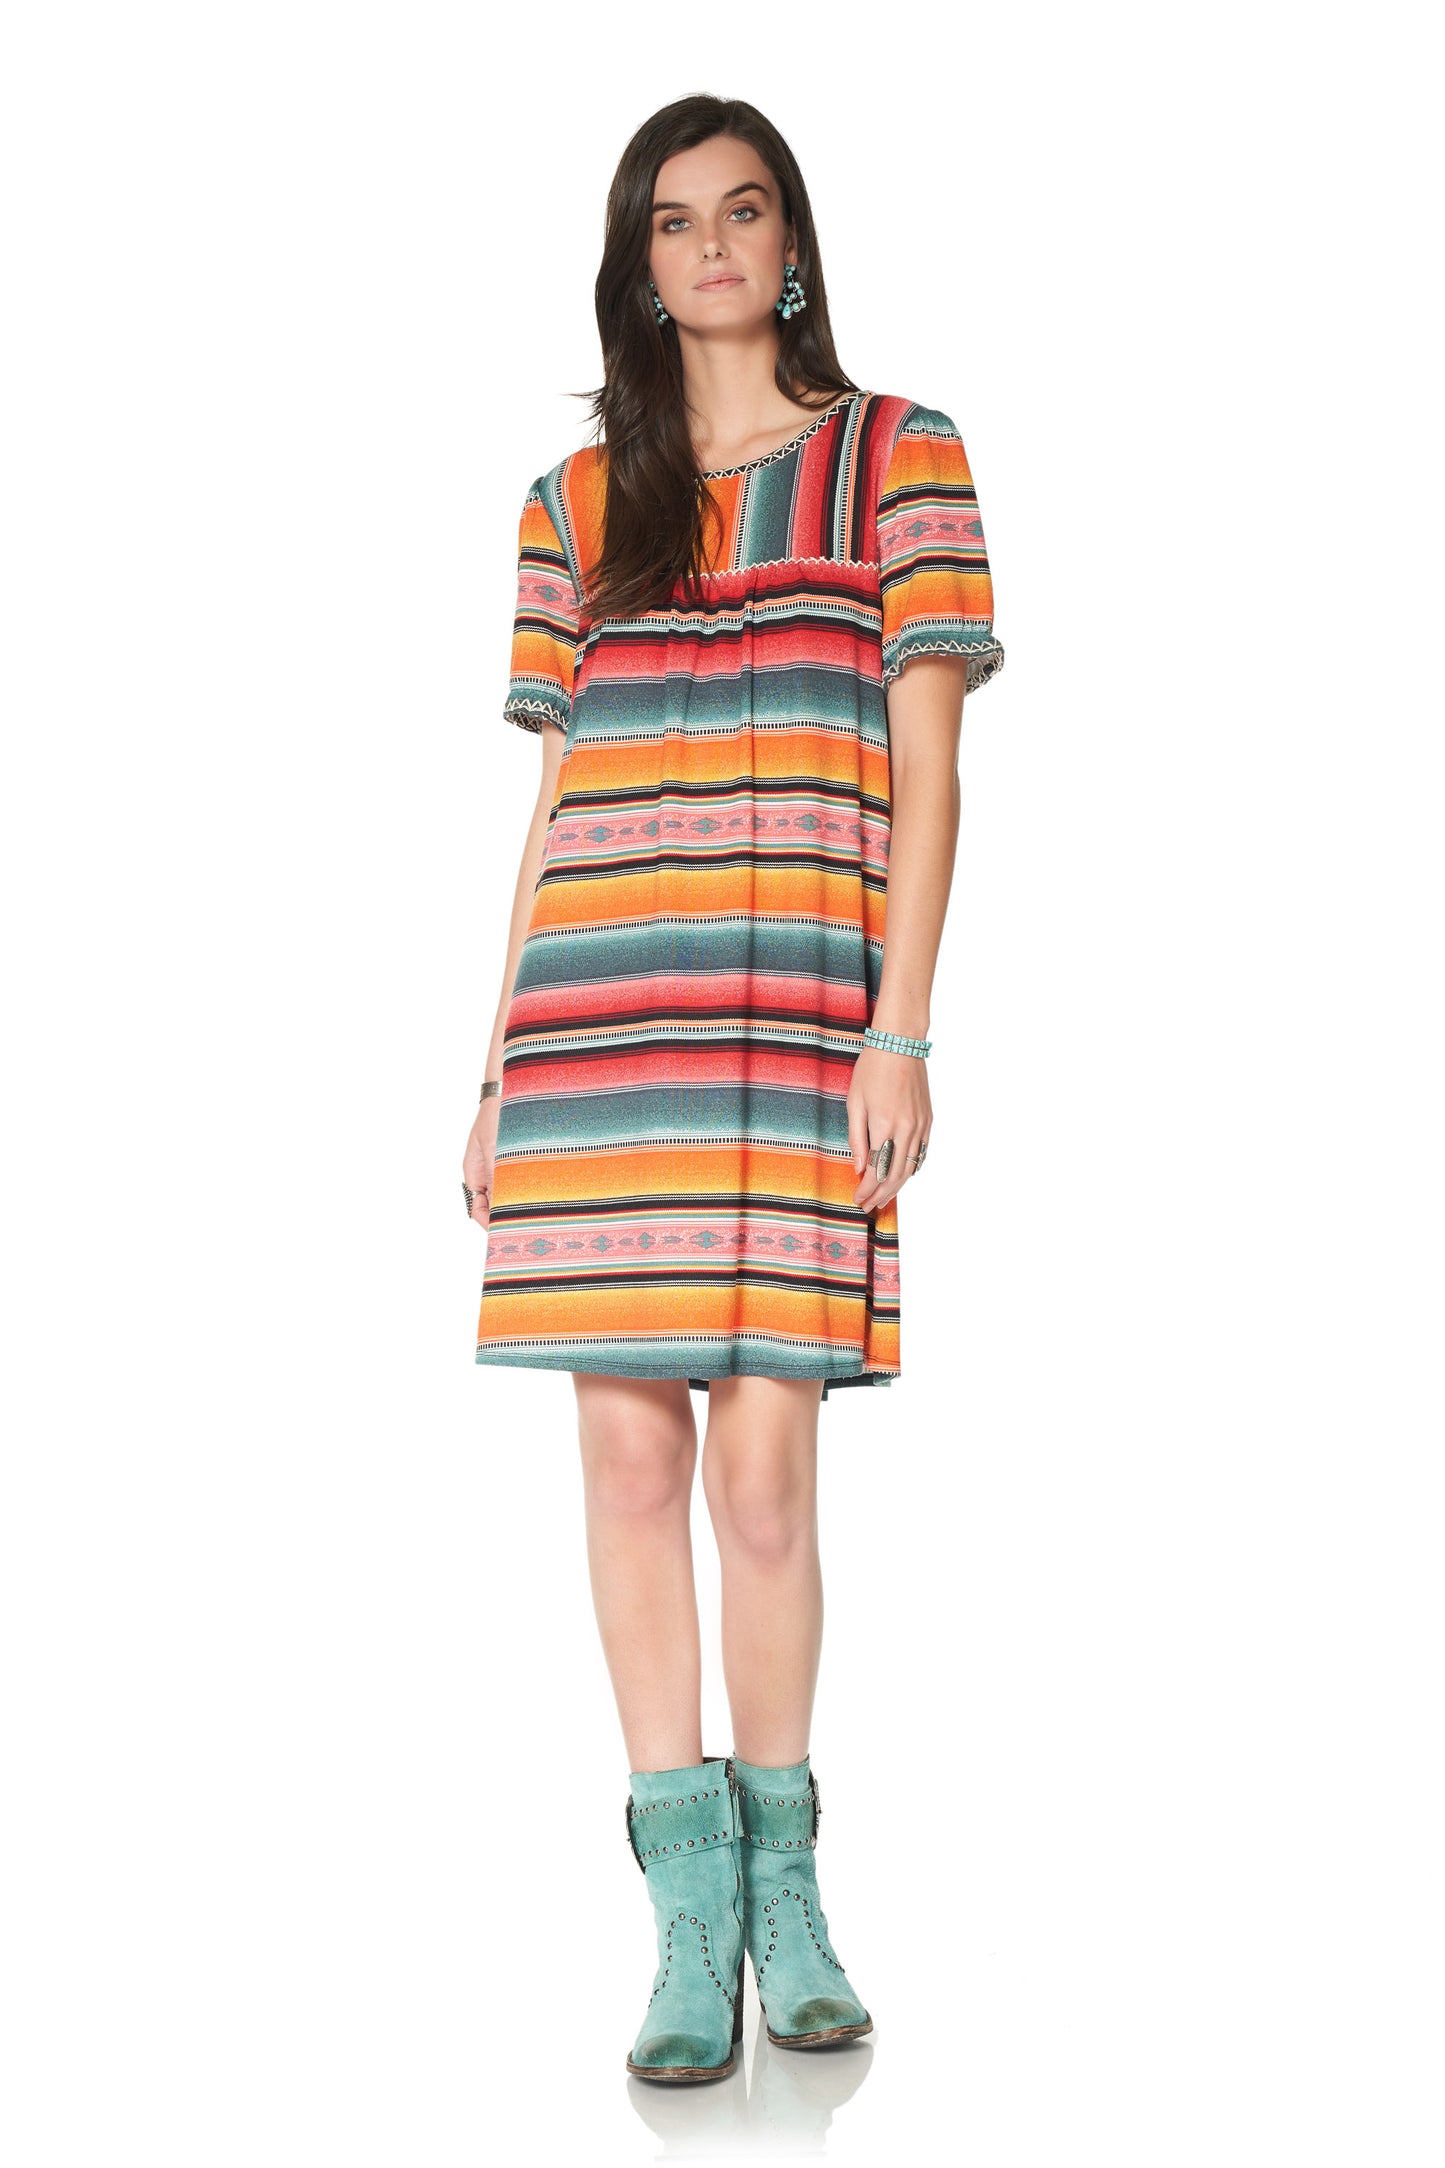 Load image into Gallery viewer, DDR Cynthia’s Bright serape print dress at 6Whiskey six whiskey D1302
